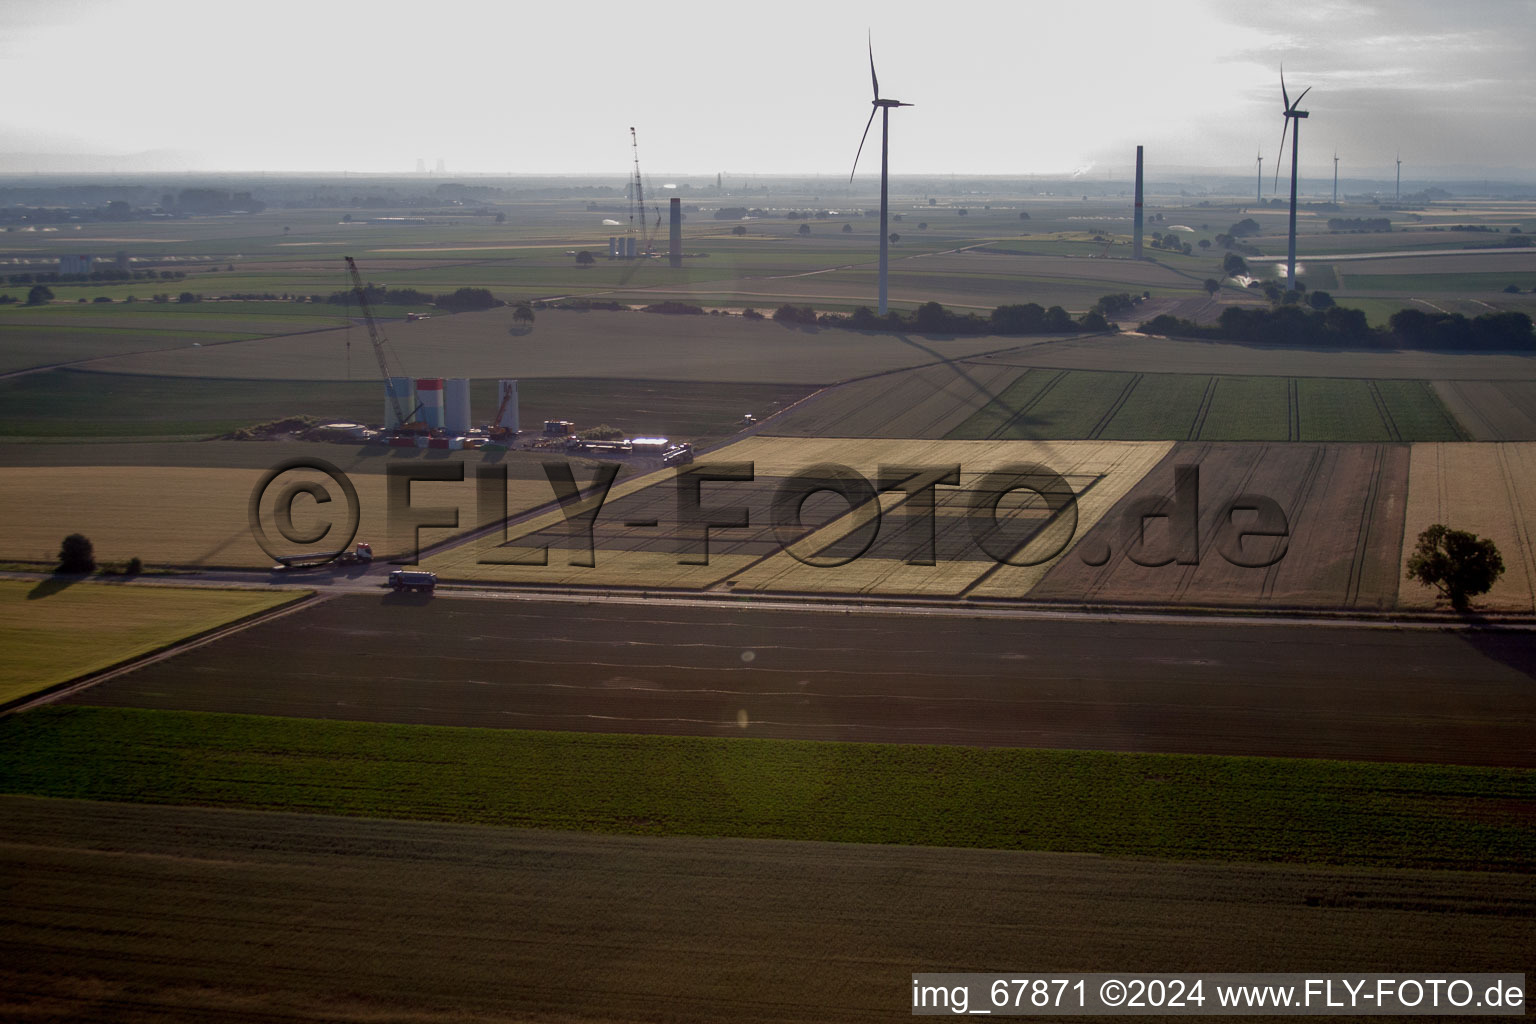 Aerial view of New wind farm in Offenbach an der Queich in the state Rhineland-Palatinate, Germany